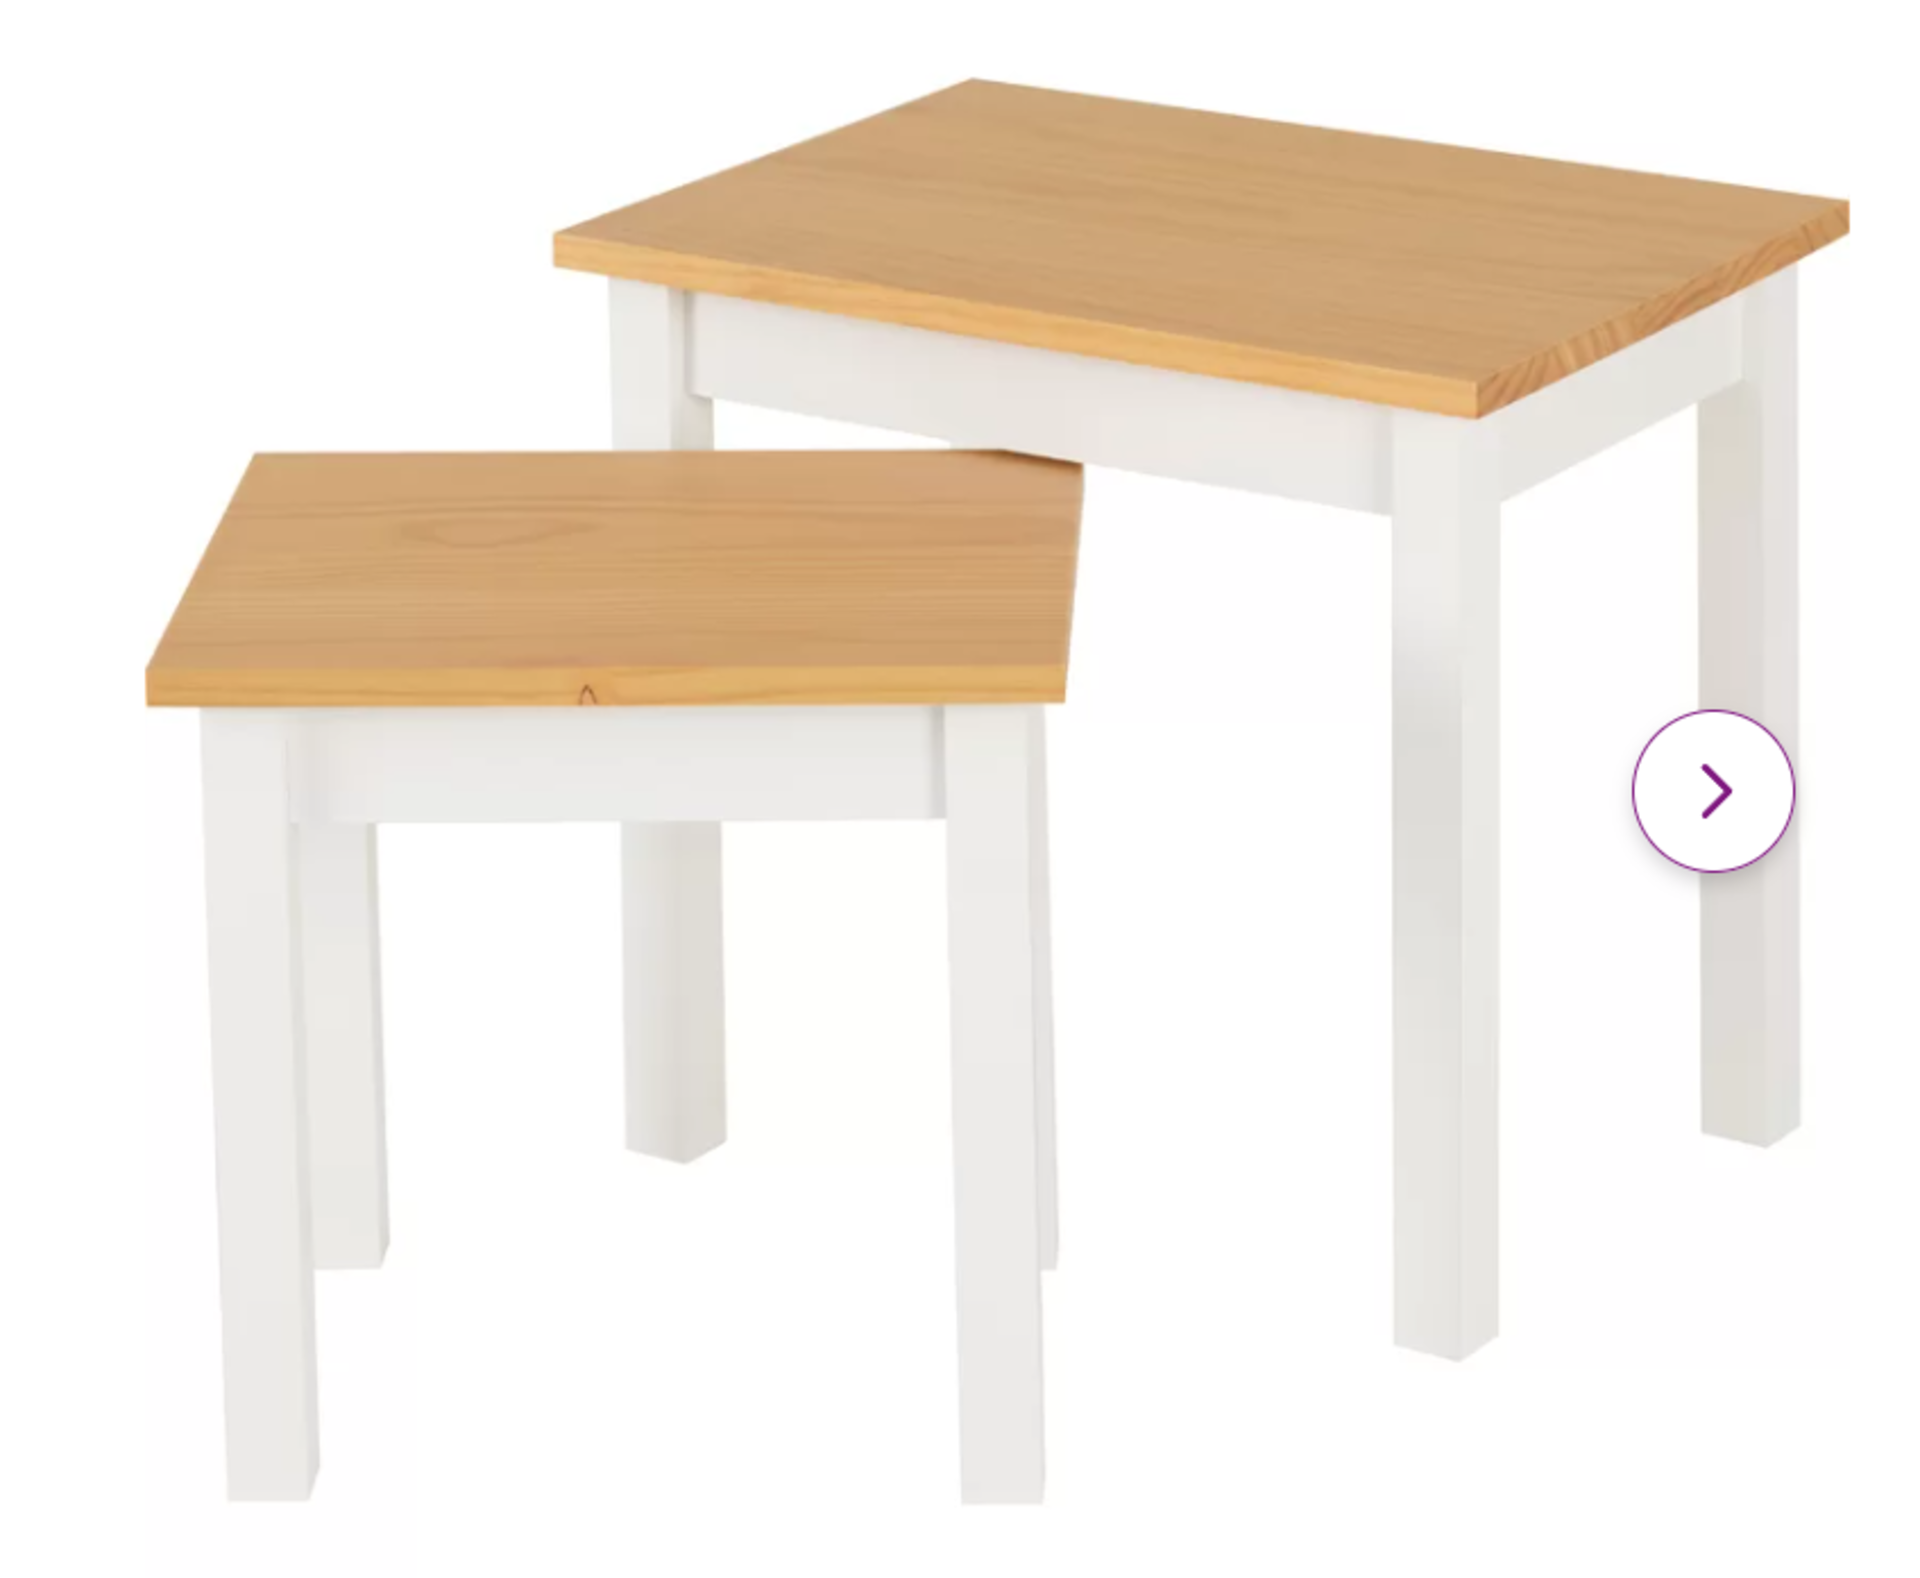 Bradmoor 2 Piece Nest of Tables. RRP £155.00 - SR4. The Bradmoor nest of tables is excellent for